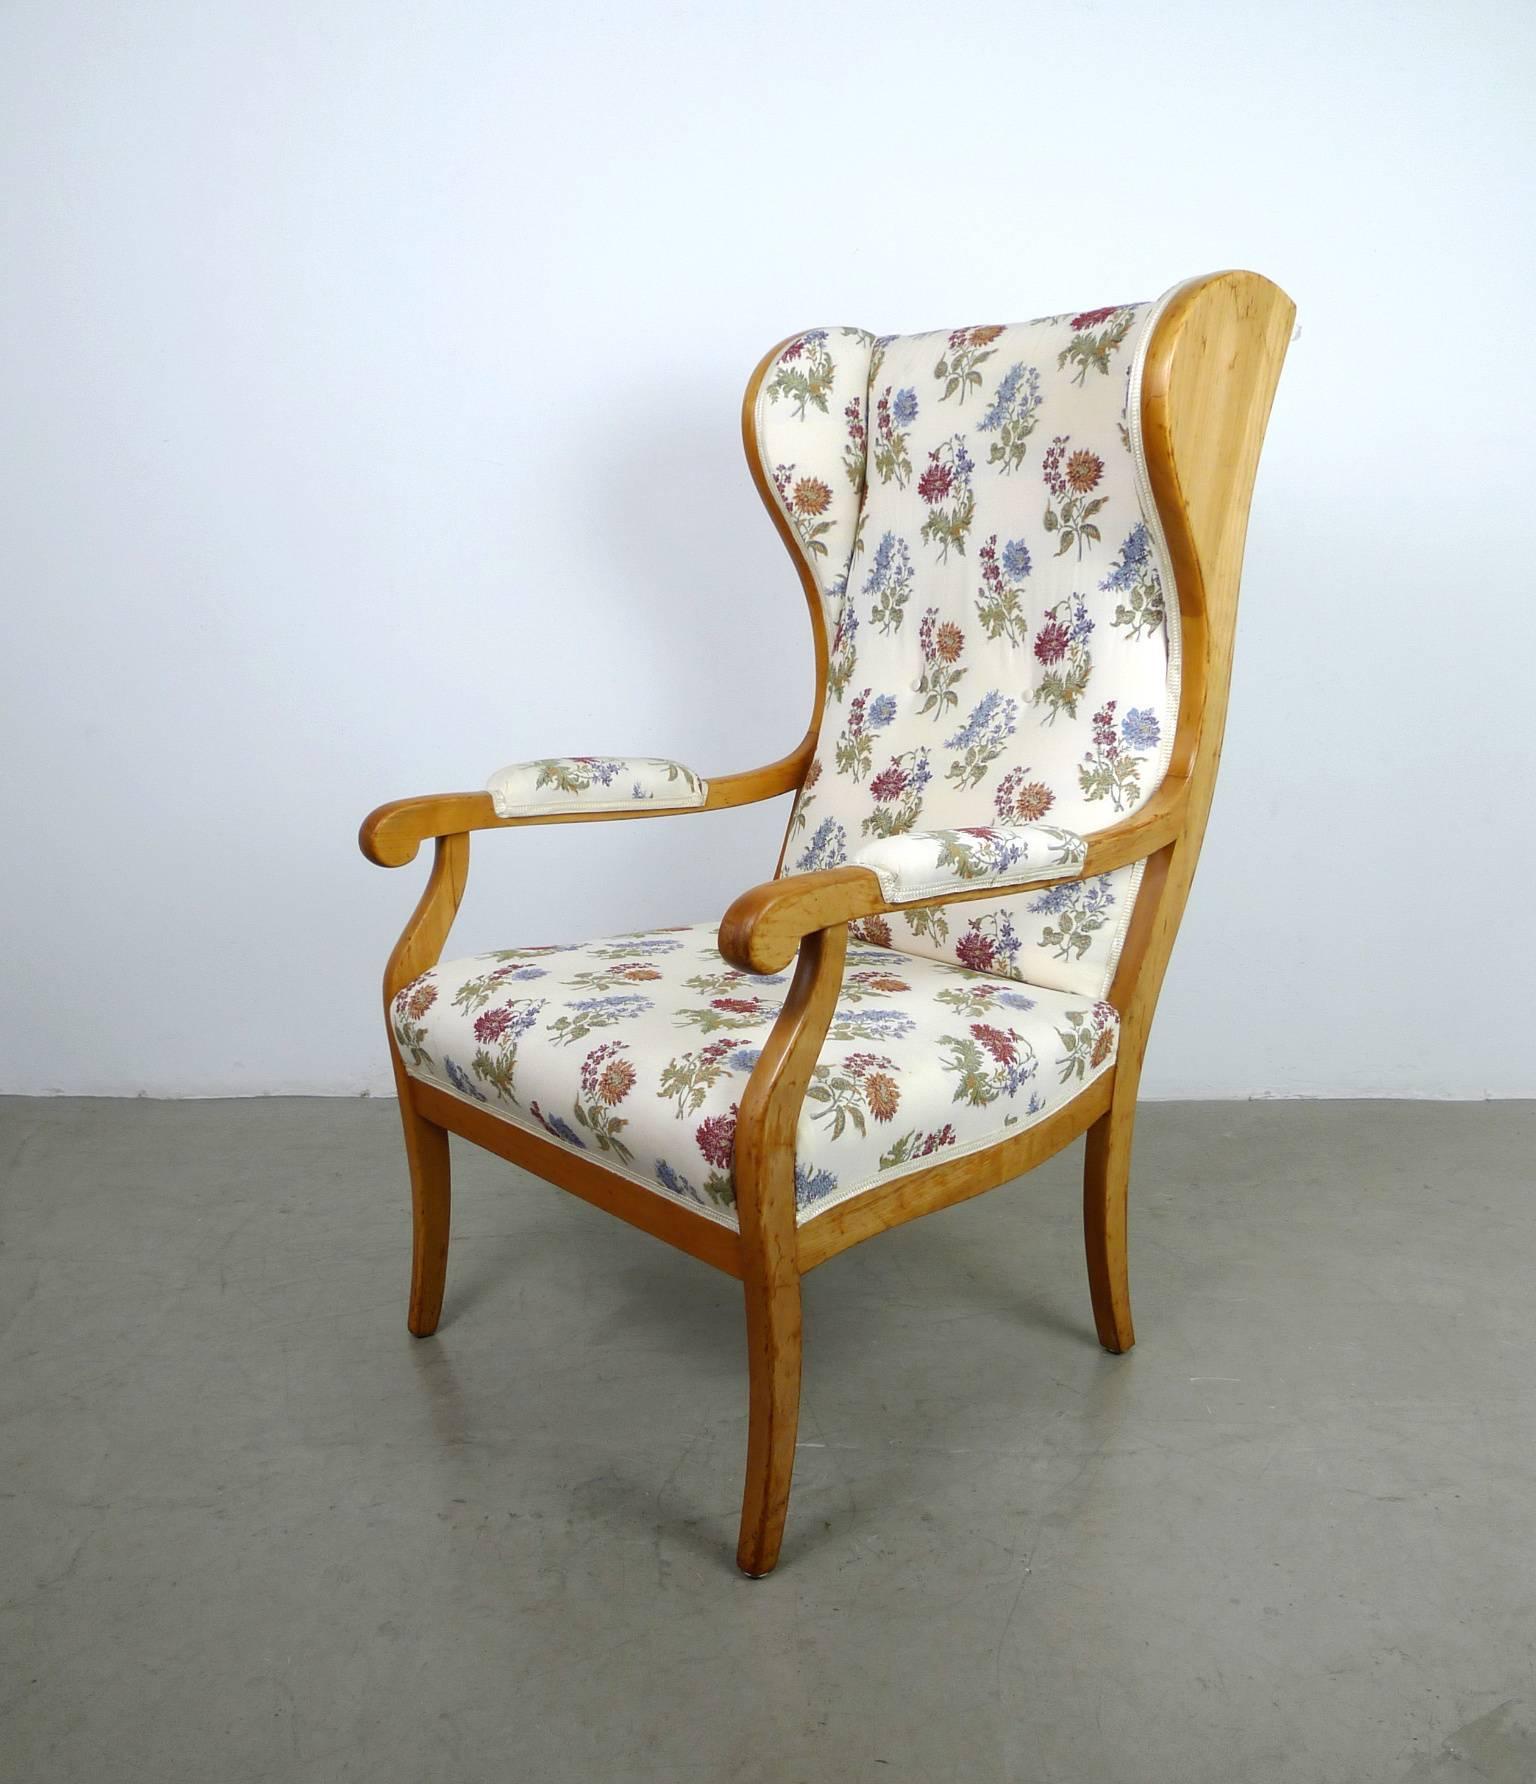 This wingback chair features a solid cherry frame and a bright fabric upholstery cover with floral motifs. The backrest is also covered on the back with fabric. The armrests are partially upholstered on the right and left. The fabric surfaces are